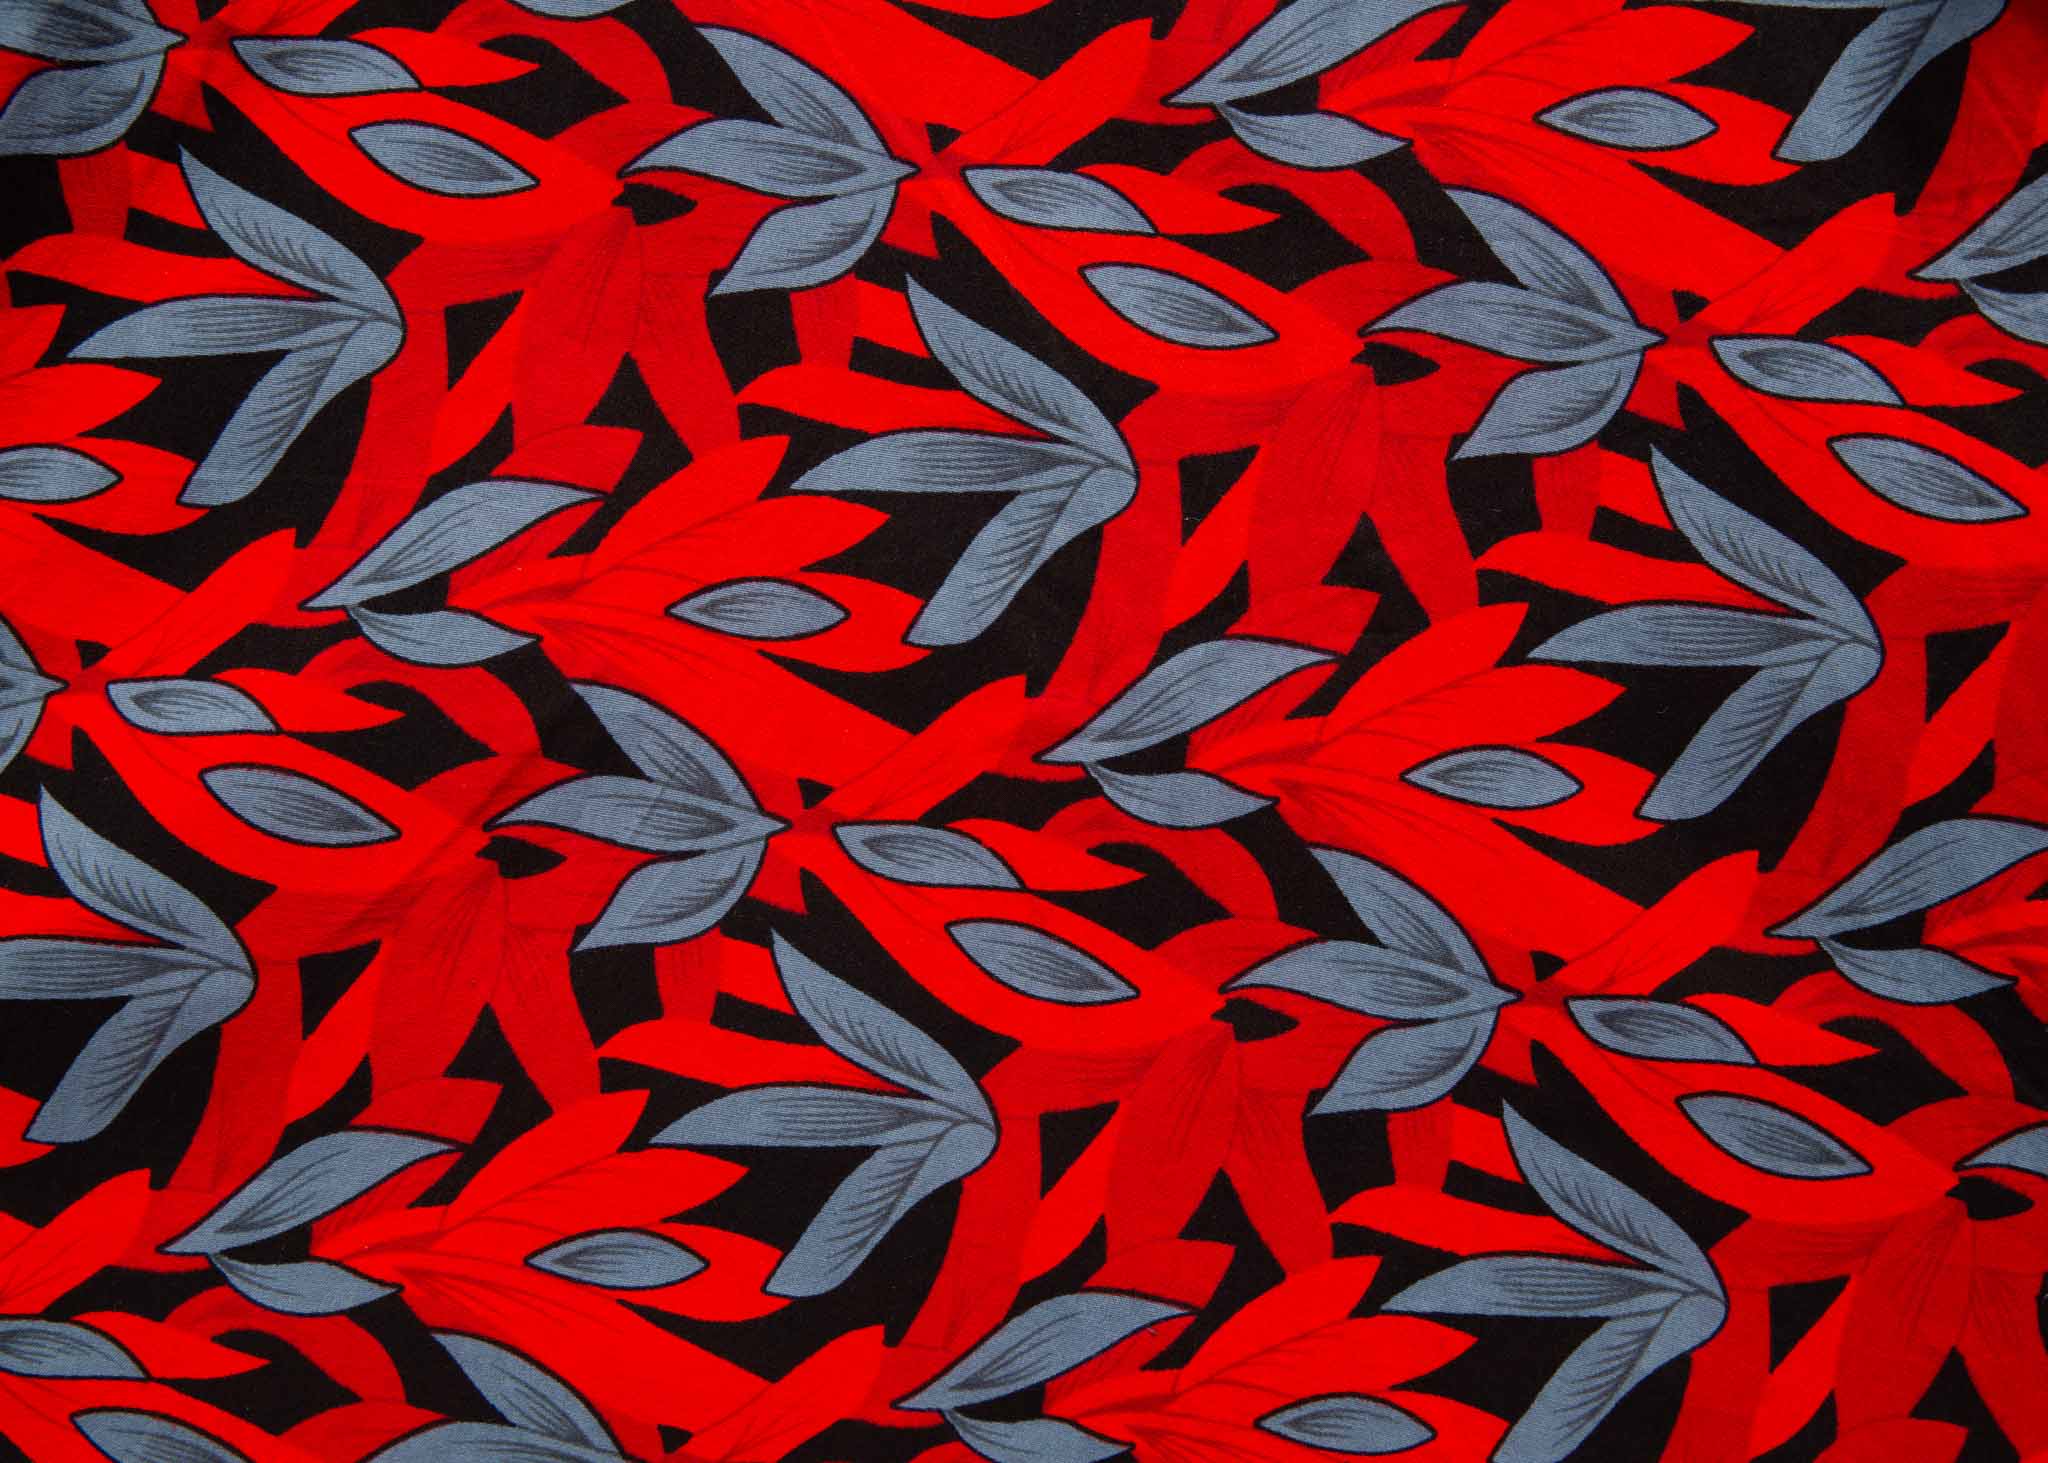 Close up display of red, black and gray leaf print dress, fabric.